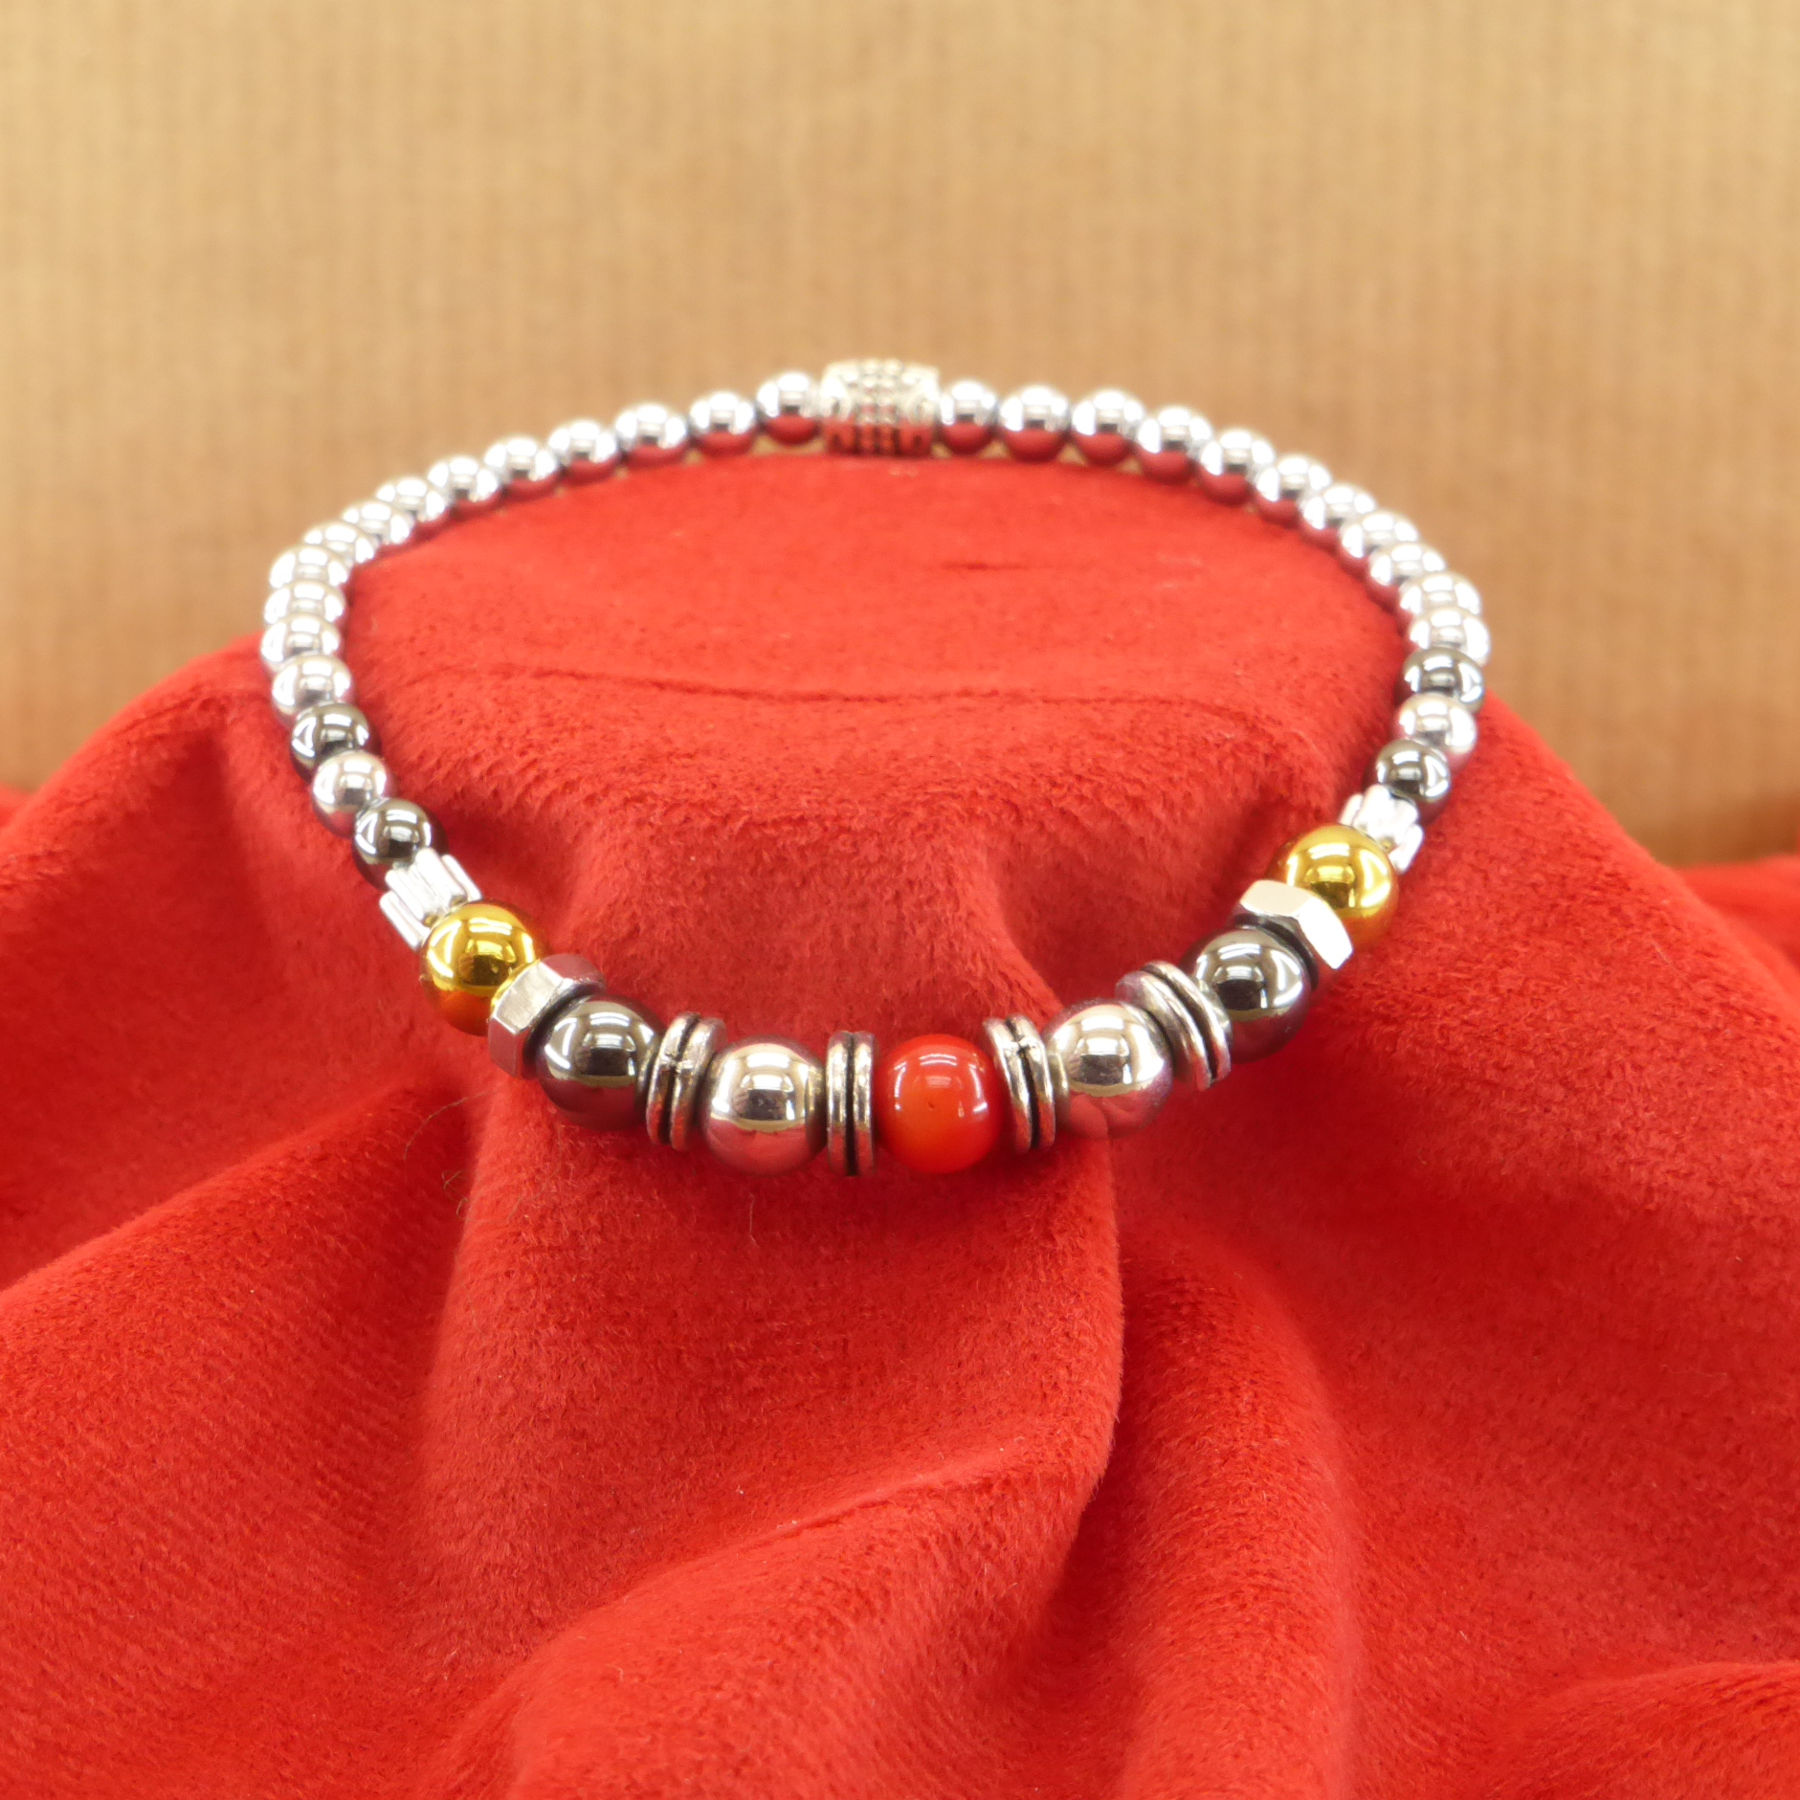 Silver, Gold and Black Hematite Bracelet, Red Pearl, Stainless Steel Nut and Charms